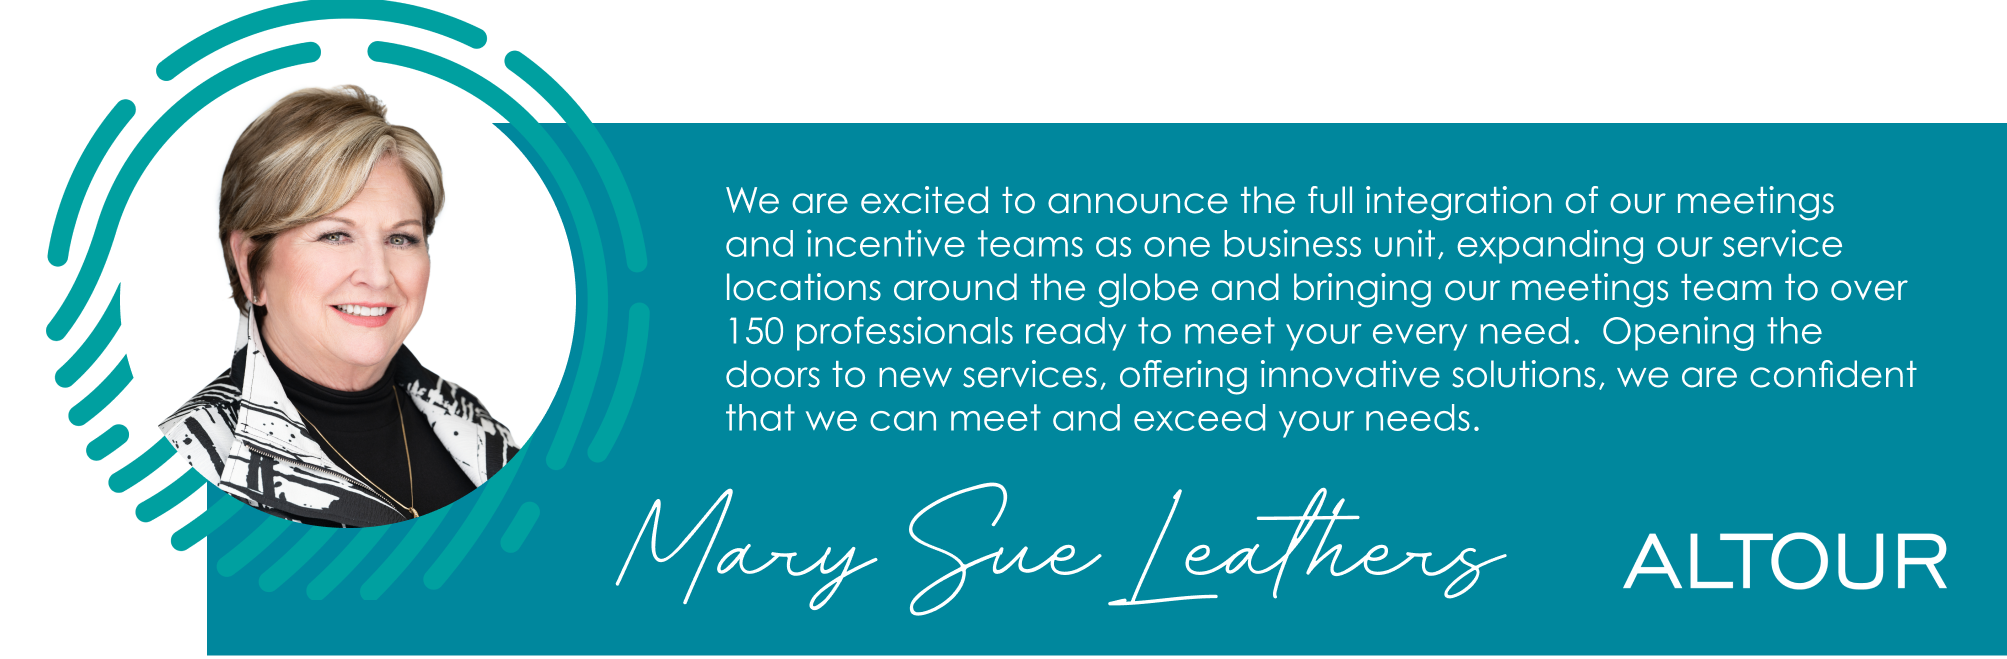 We are excited to announce the full integration of our meetings  and incentive teams as one business unit, expanding our service locations around the globe and bringing our meetings team to over 150 professionals ready to meet your every need.  Opening the doors to new services, offering innovative solutions, we are confident that we can meet and exceed your needs.